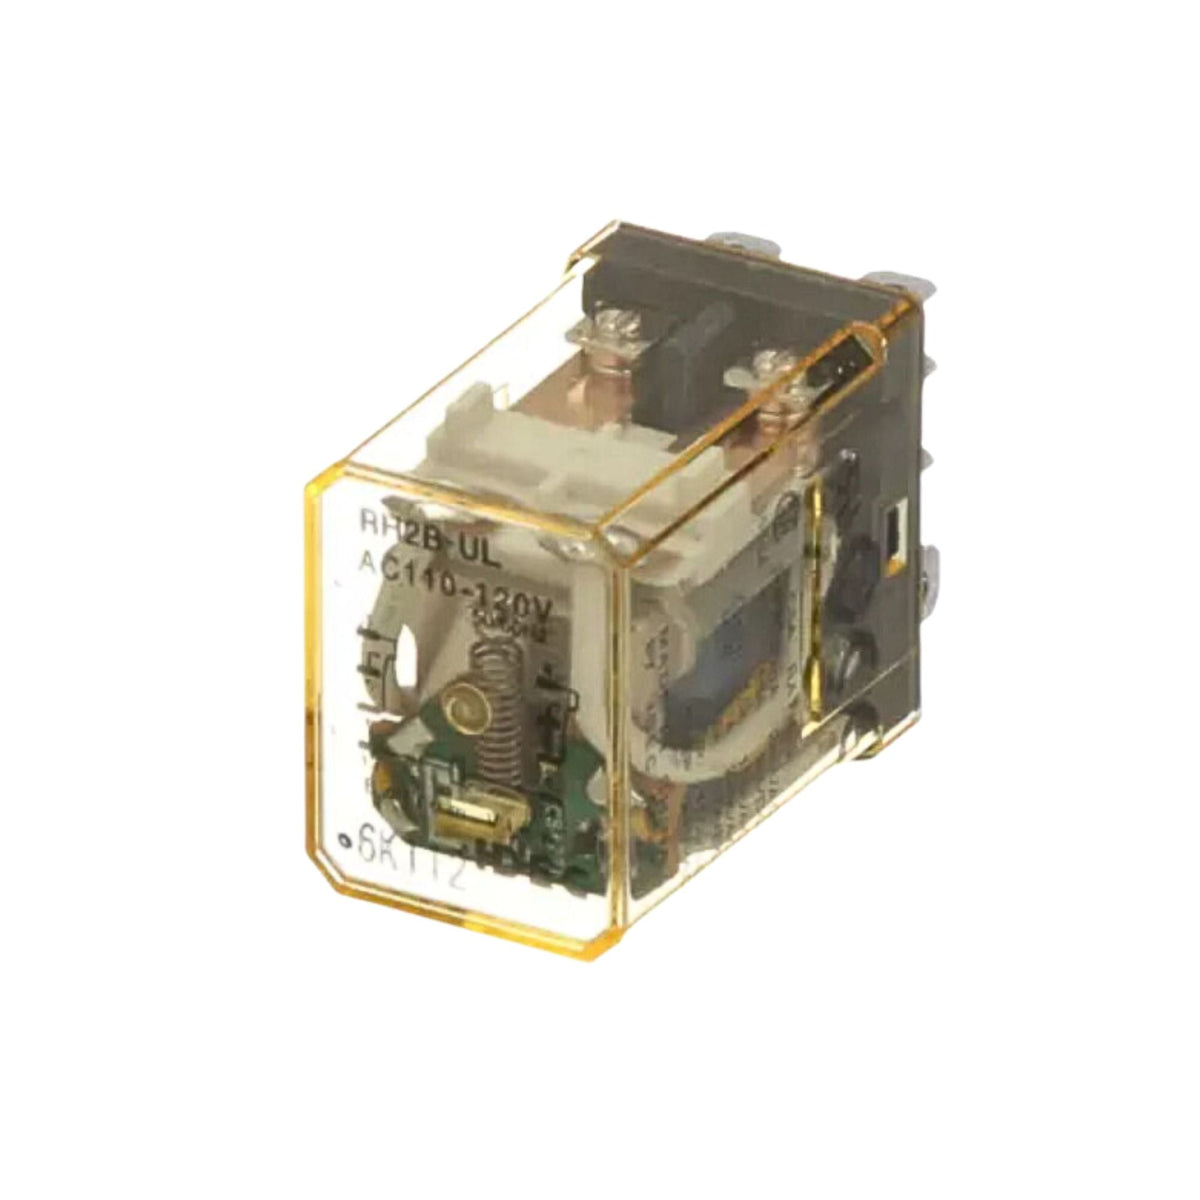 Relay Plug-In DPDT 10A 120VAC | RH2B-ULAC110-120V used on Idec product line - front view